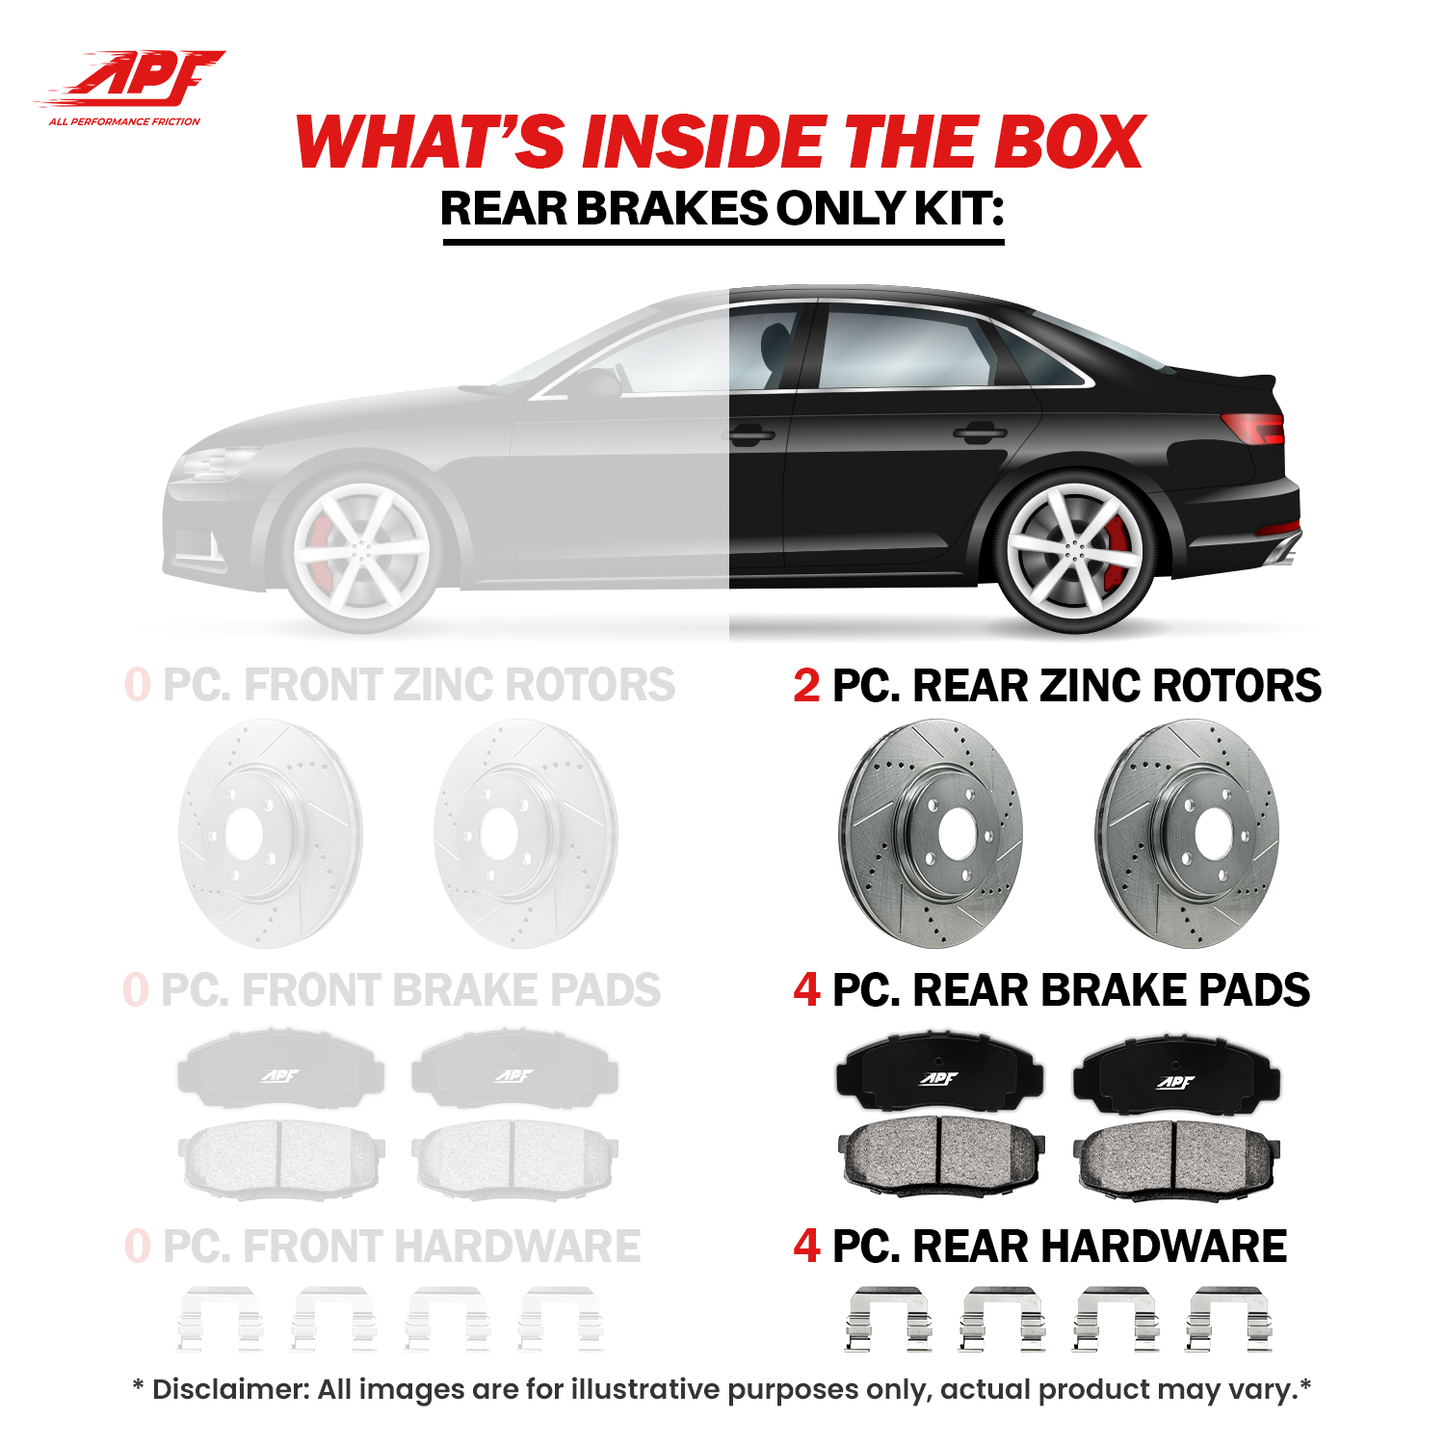 APF All Performance Friction Rear Rotors and Pads Half Kit compatible with Acura TSX 04-08 Zinc Drilled Slotted Rotors with Ceramic Carbon Fiber Brake Pads | $120.36